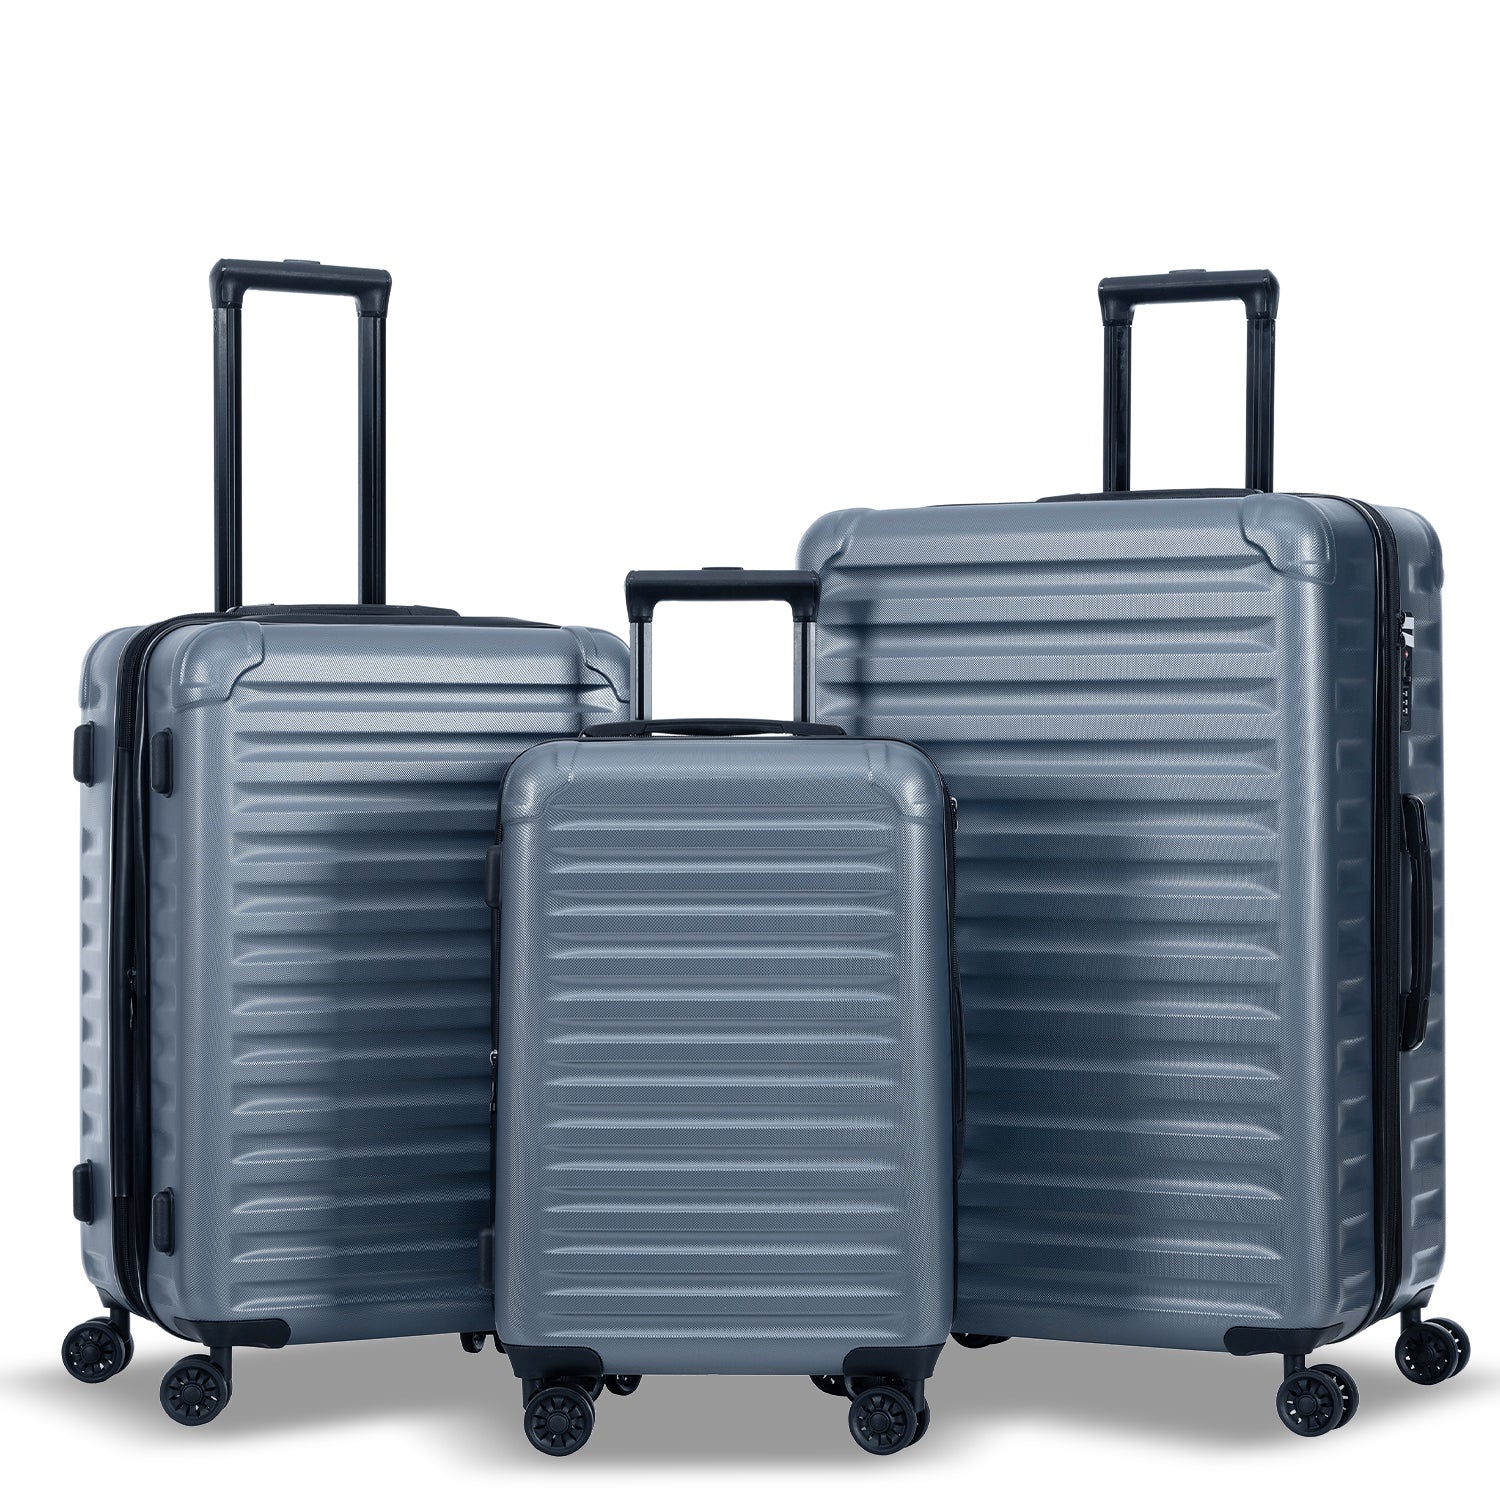 Luggage Sets Model Expandable ABS PC 3 Piece Sets with steel gray-abs+pc